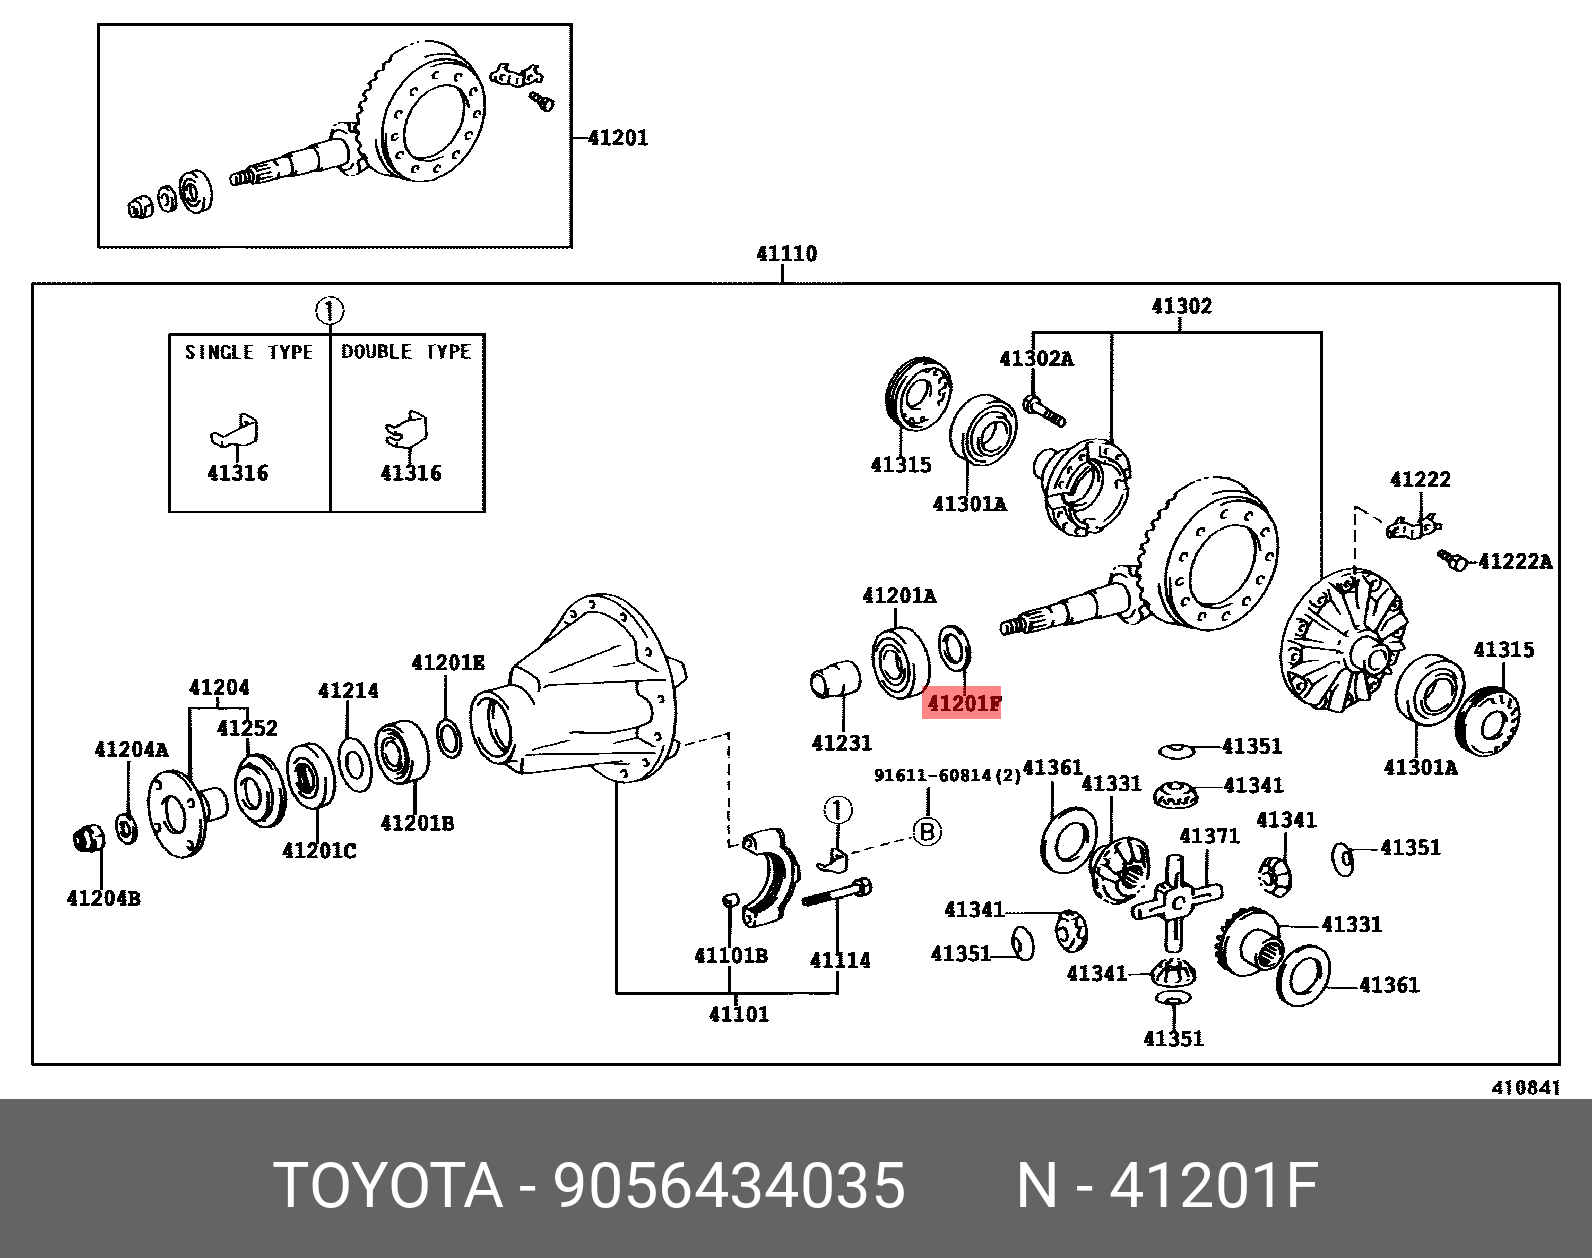 9056434035, HARRIER 199712-200302, ACU1#, MCU1#, SXU1#, WASHER, PLATE (FOR REAR DIFFERENTIAL DRIVE PINION)